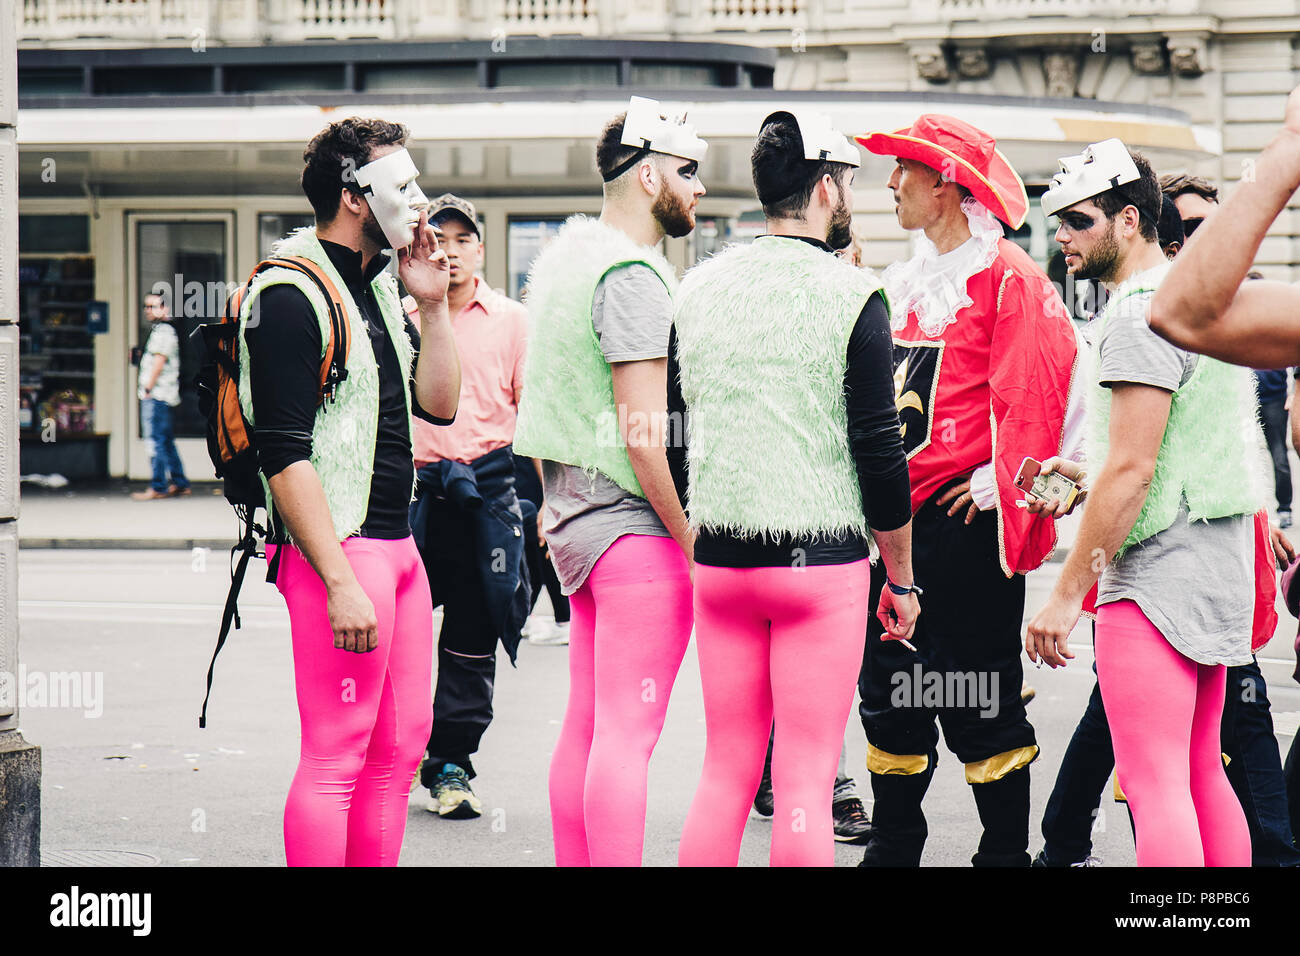 Zurich, Switzerland - August 12, 2017: People dressed up for the Street  Parade in Zürich. A group of men wearing fancy pink leggings Stock Photo -  Alamy